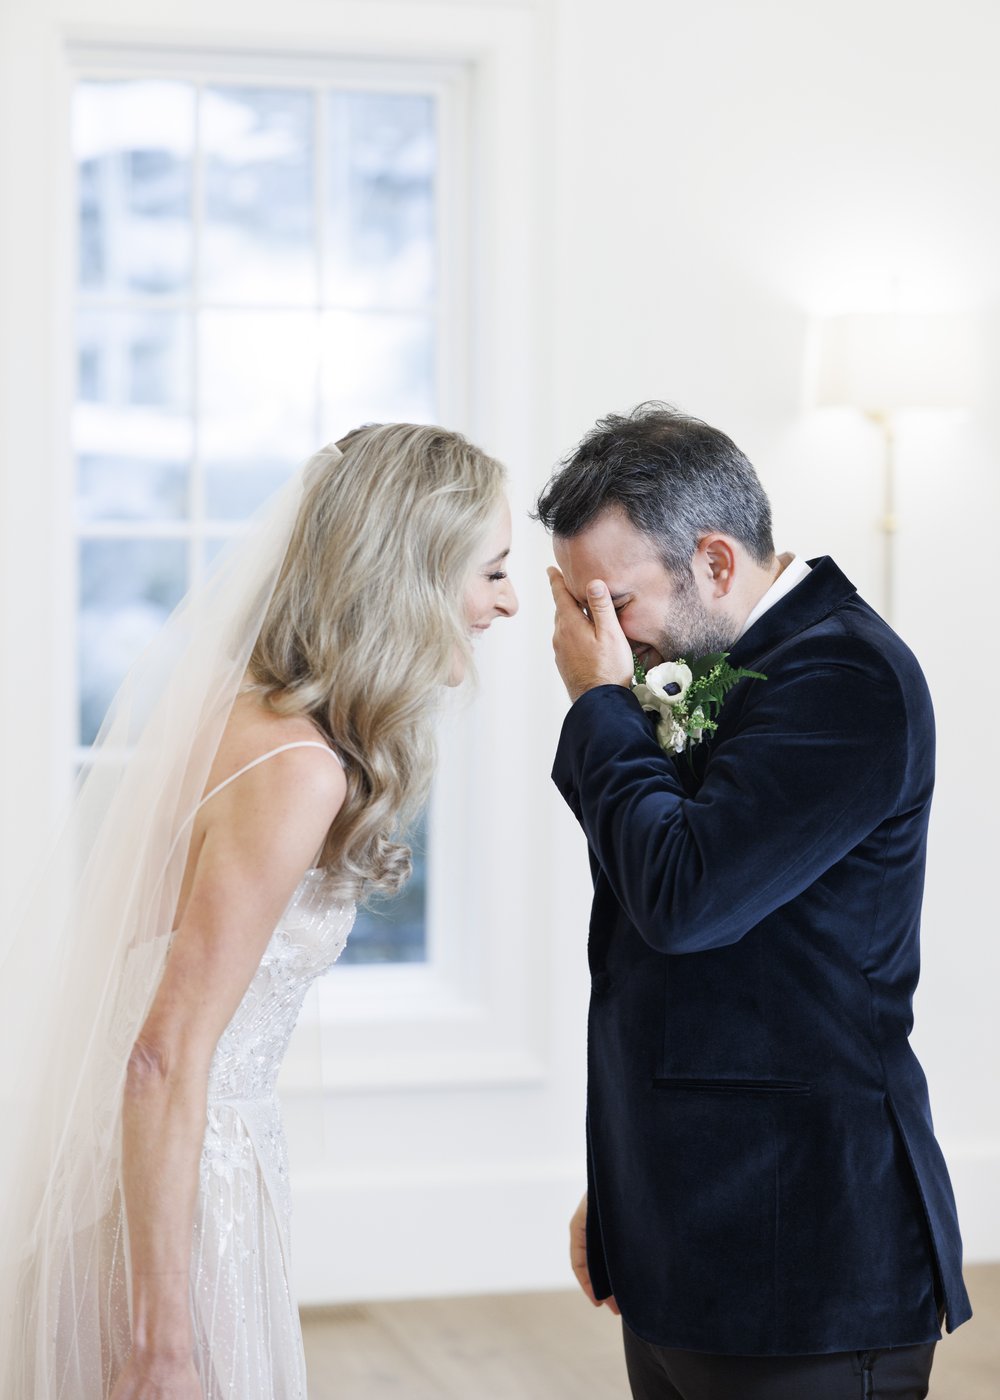  Groom covers his eyes as he waits to see his bride, by Savanna Richardson Photography a wedding photographer. first glance #SavannaRichardsonPhotography #SavannaRichardsonWeddings #NYEwedding #magicalwedding #snowywedding #holidaywedding #married 